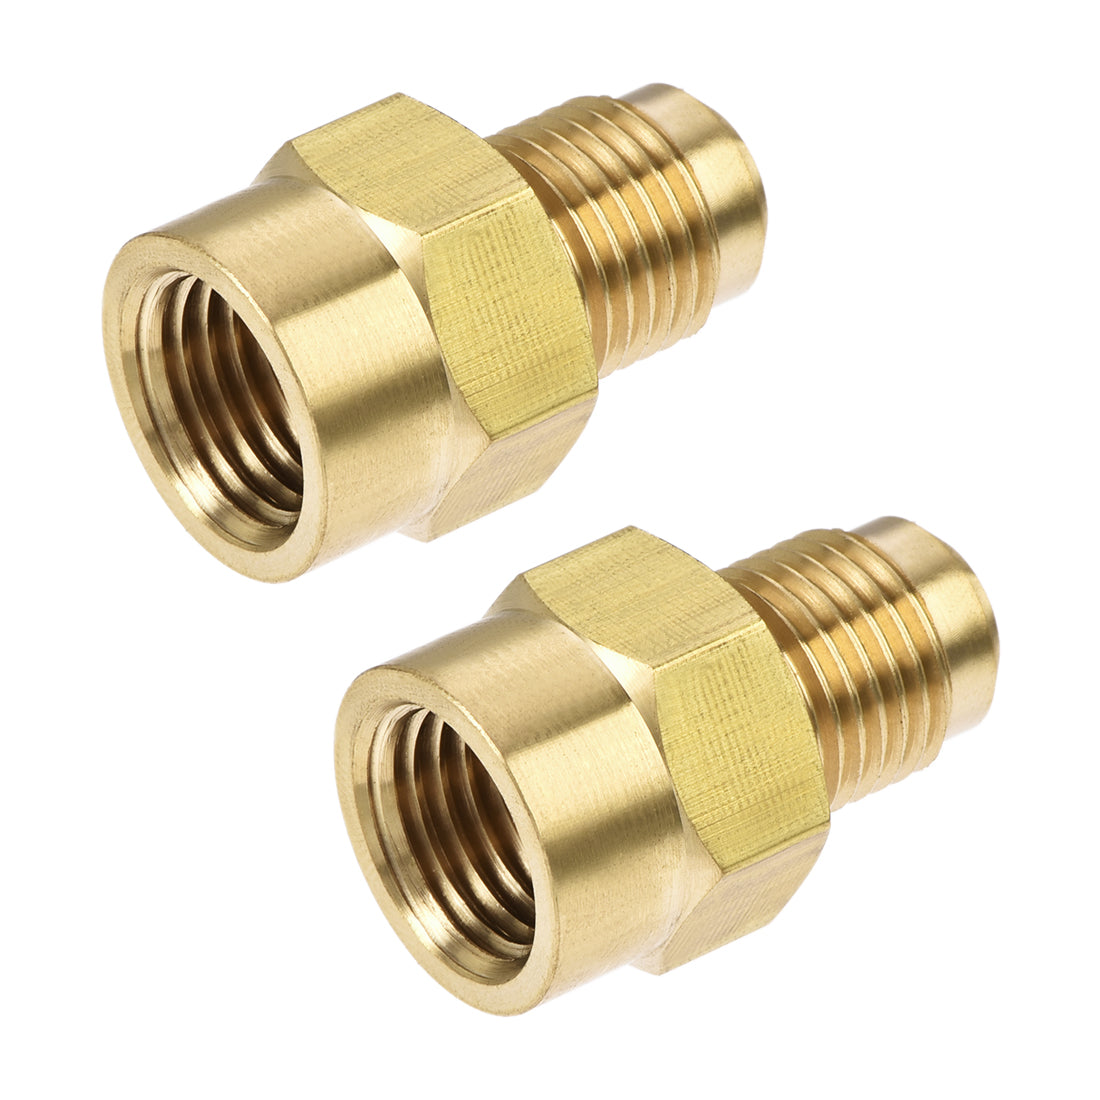 Uxcell Uxcell Brass Pipe Fitting, 5/8-18UNF Flare Male to 1/4NPT Female Thread, Tubing Adapter Hose Connector, for Air Conditioner Refrigeration